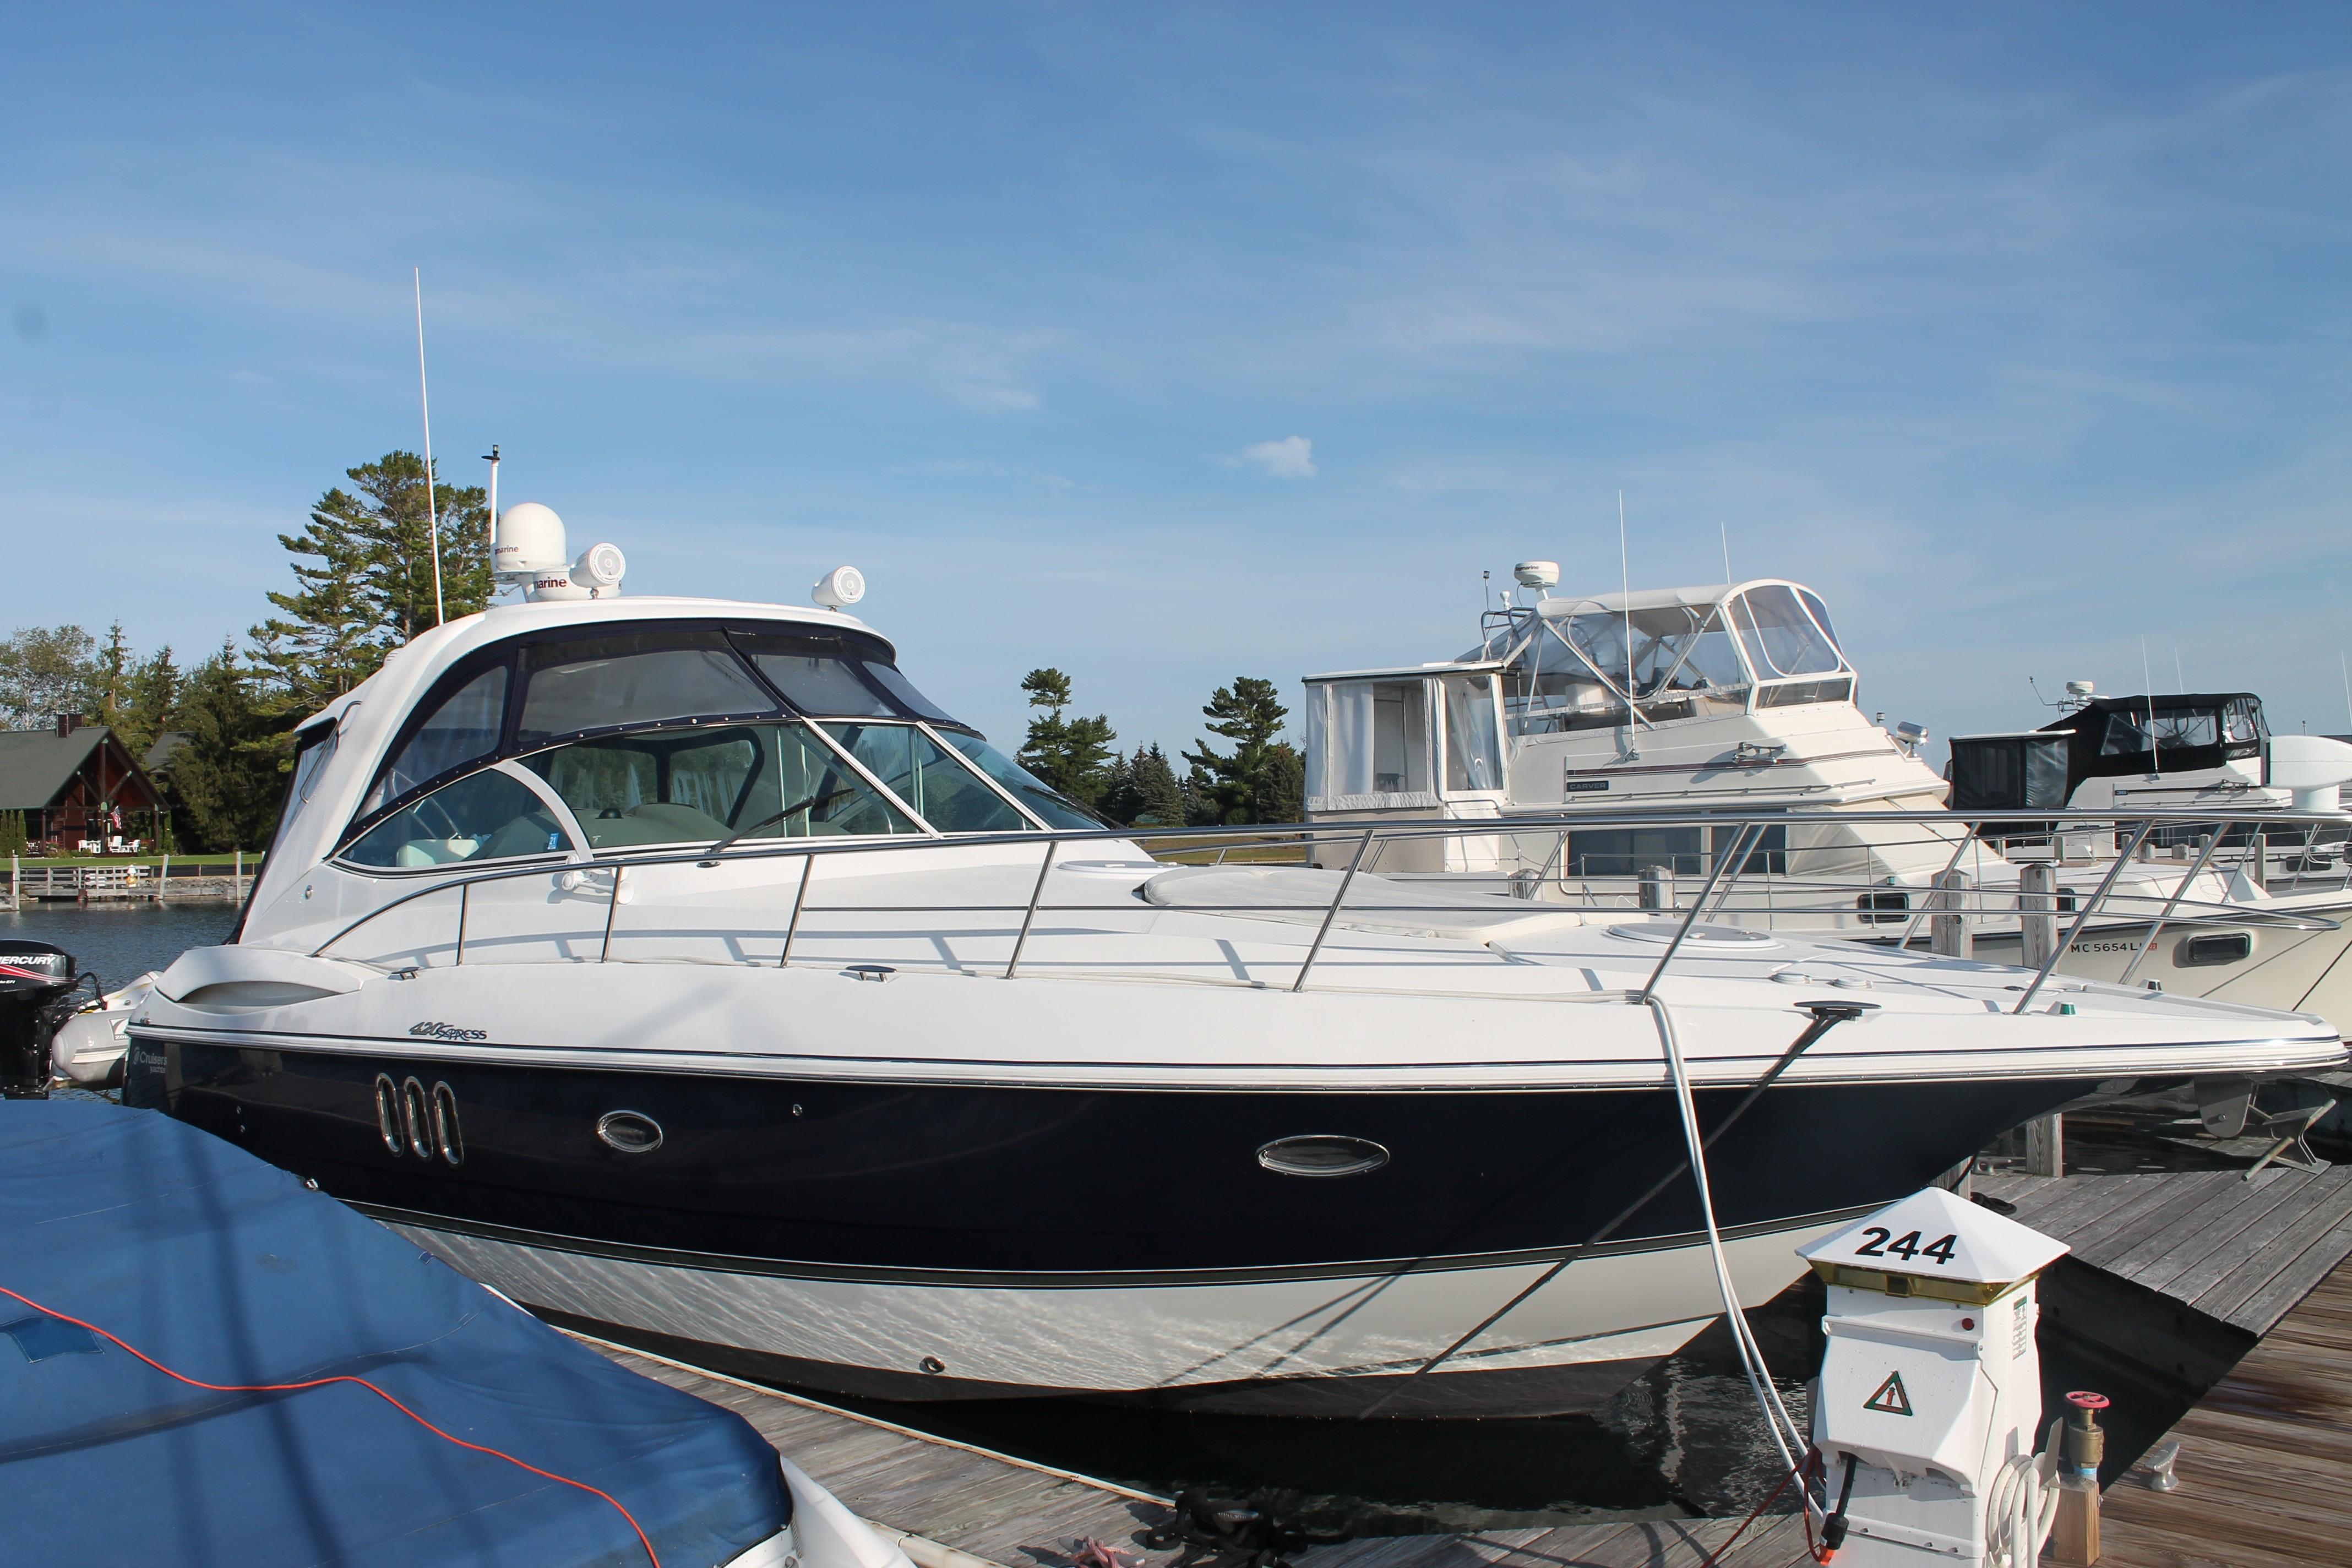 42 foot cruiser yacht for sale